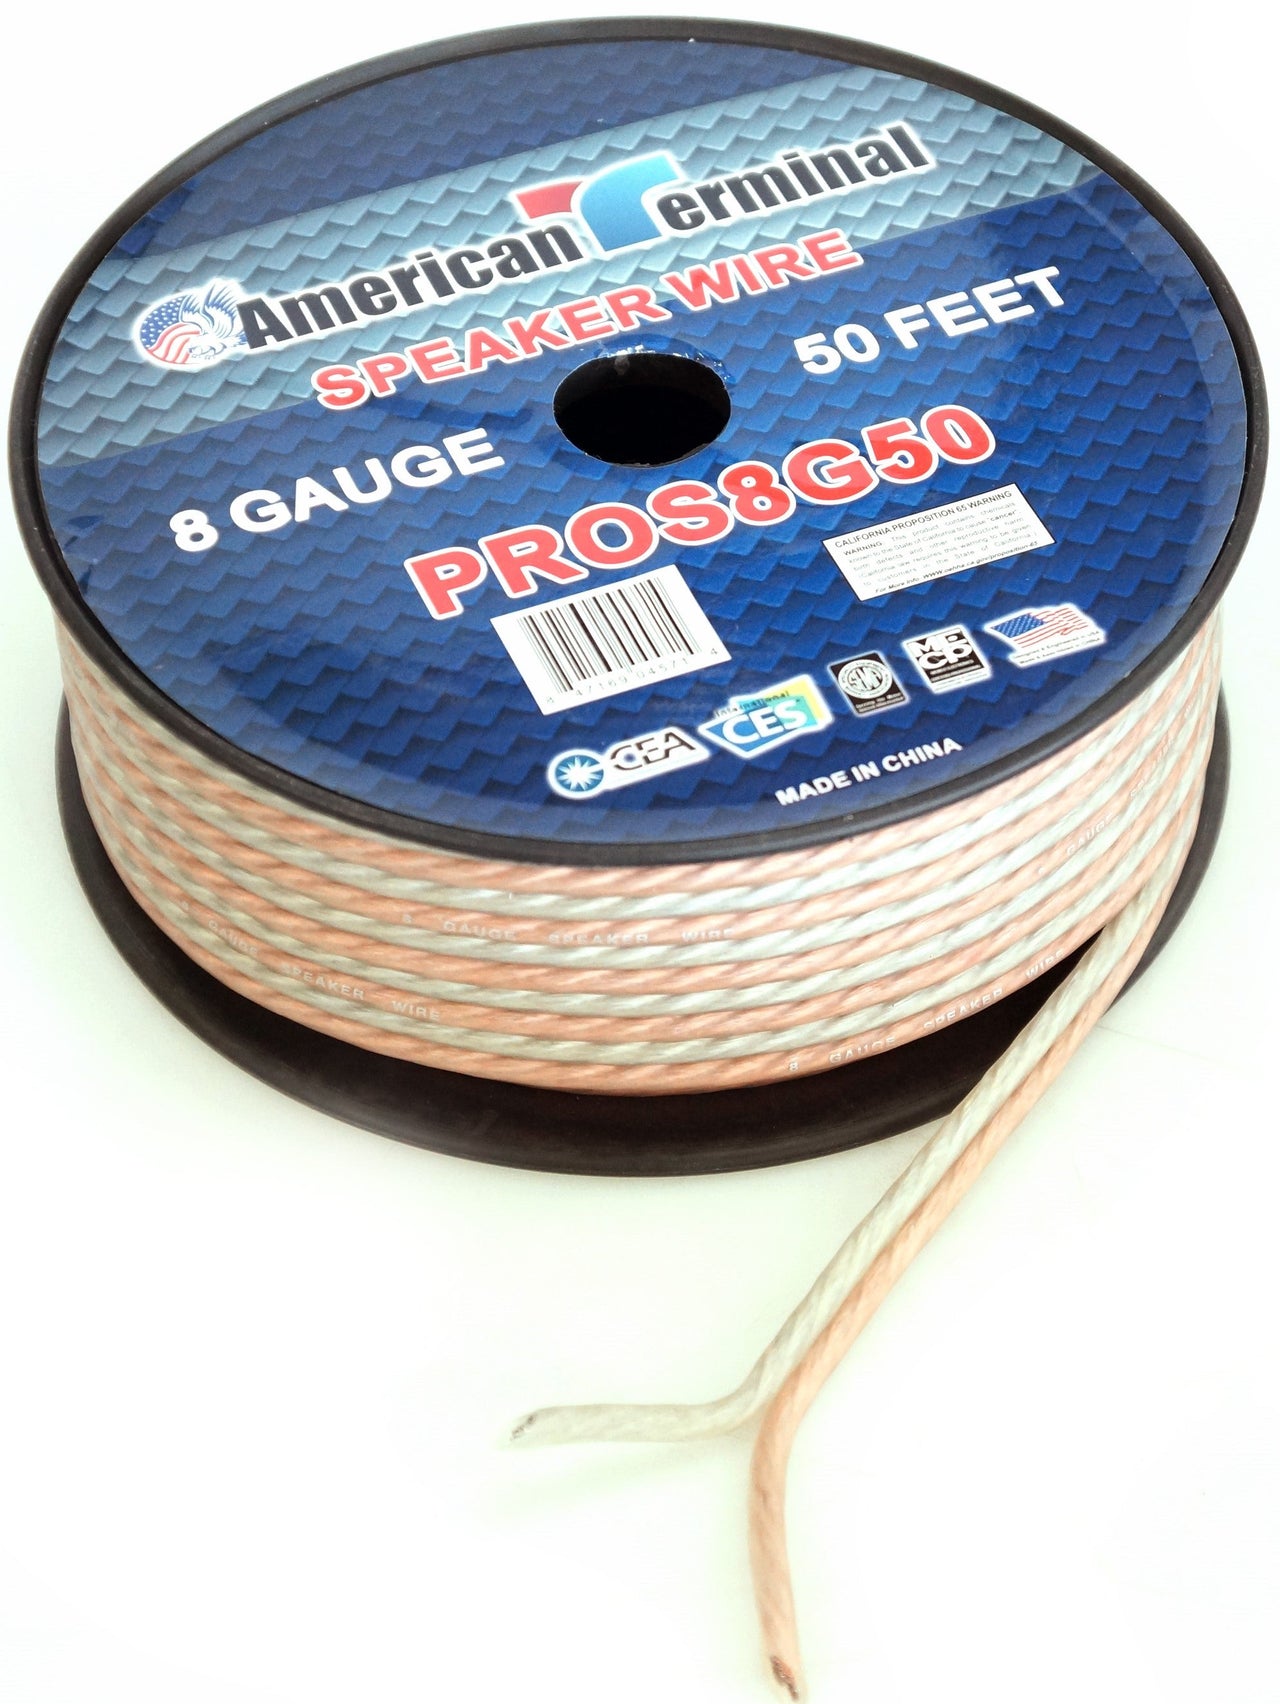 American Terminal PROS8G50 50' 8 Gauge PRO PA DJ Car Home Marine Audio Speaker Wire Cable Spool